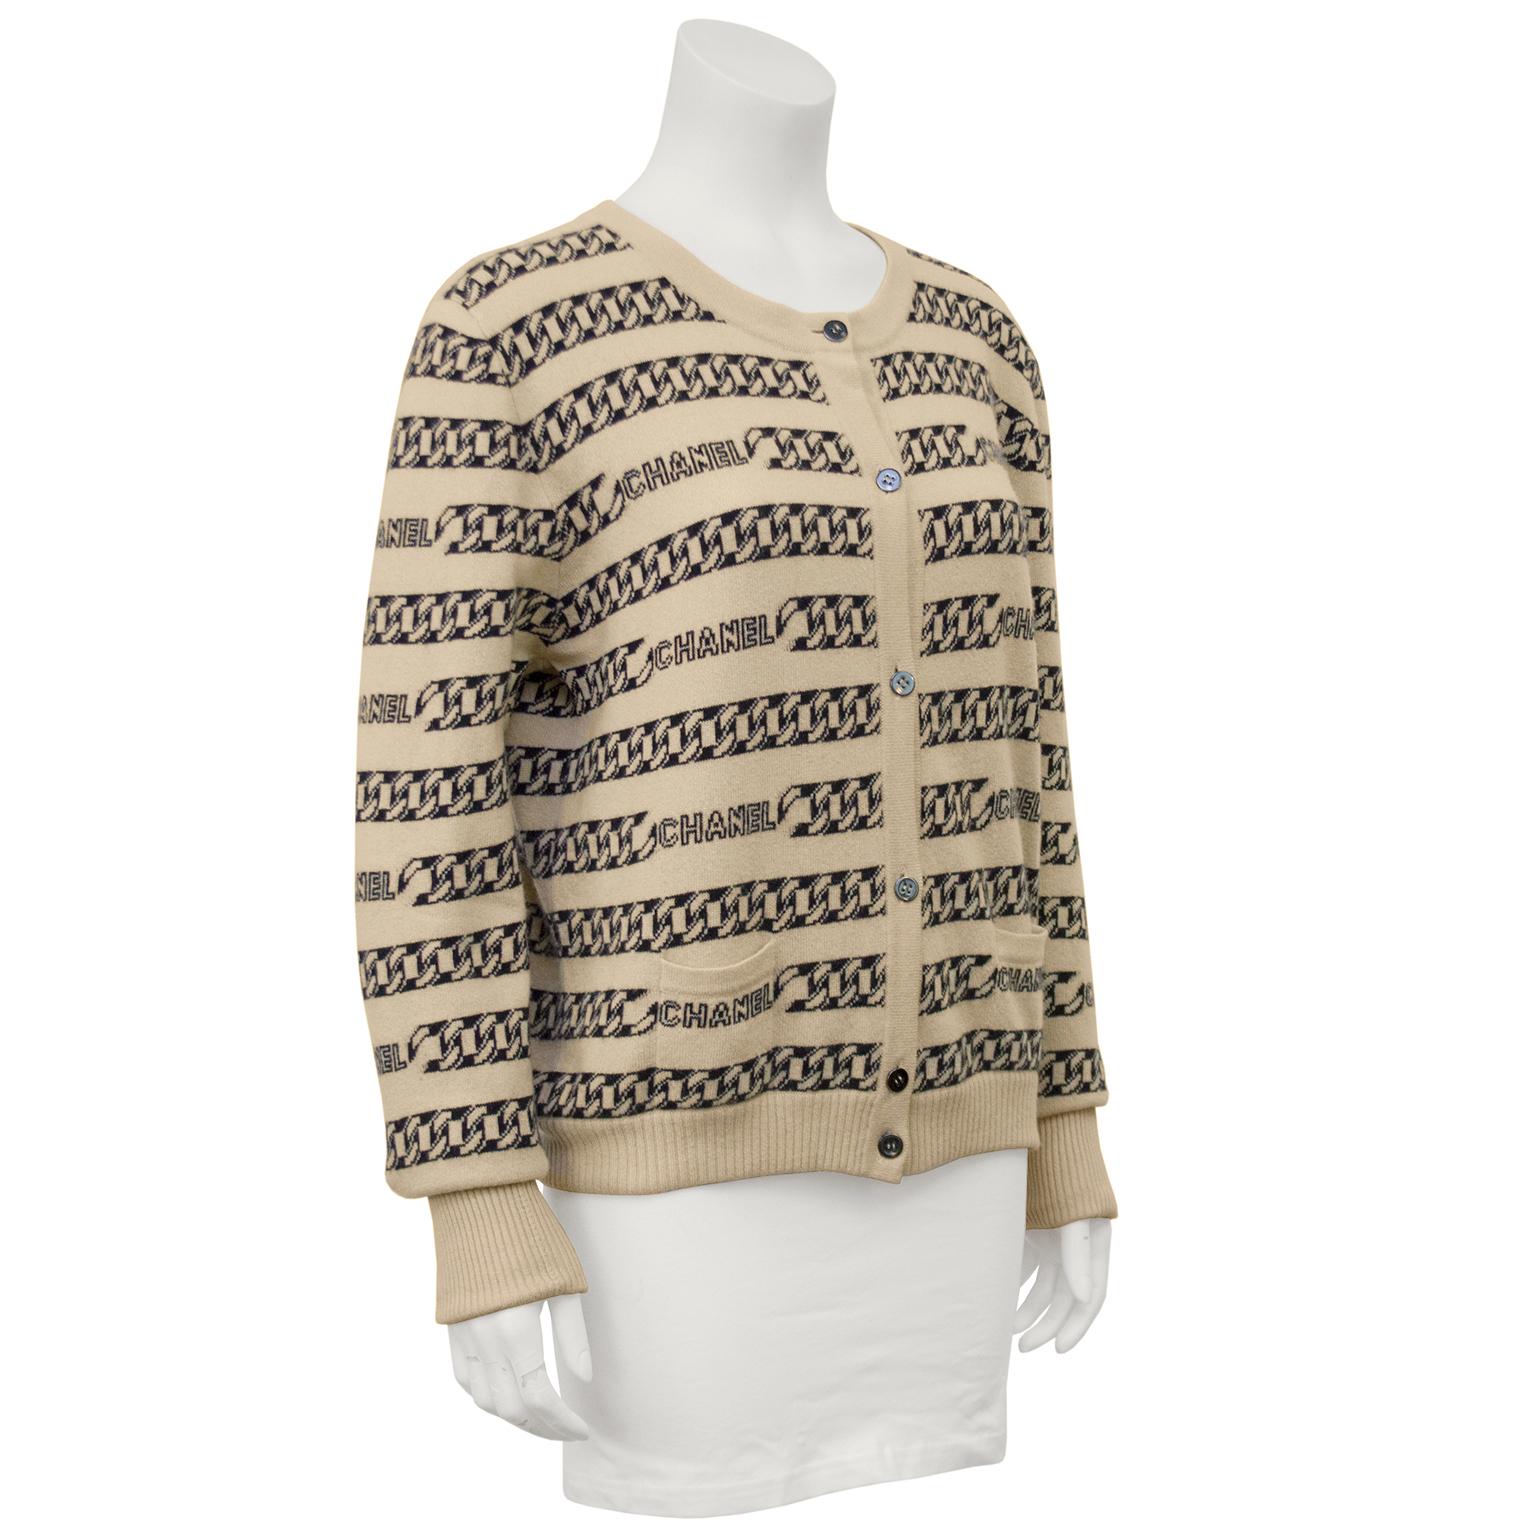 Beige and black classic colored Chanel cashmere cardigan from the 2001 Autumn collection. Chain style intarsia CC logo throughout the body of the sweater interspersed with CHANEL branded wording. Two front pockets and button front. In excellent